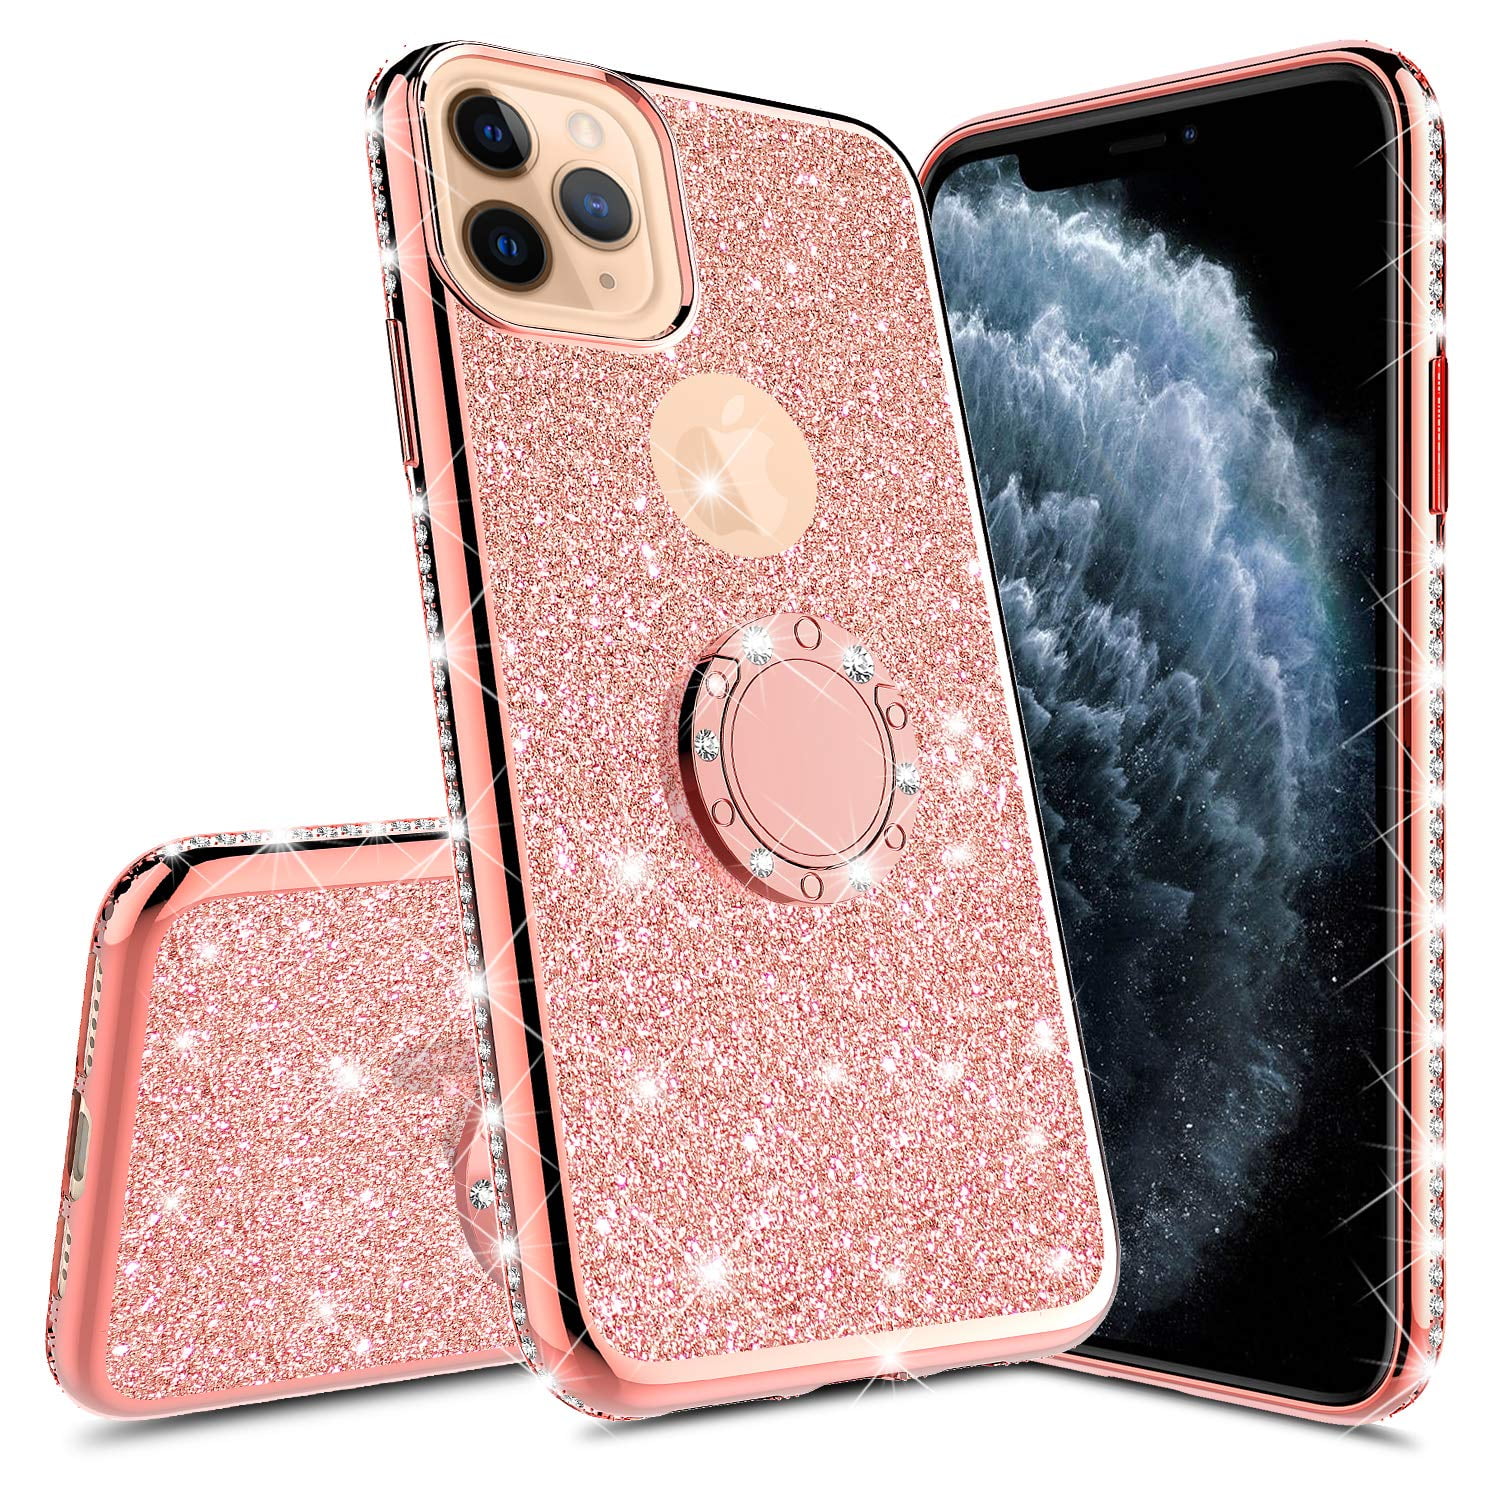 LXXZBC for iPhone 12 Pro Max 6.7 Case,Luxury Box Design Bling Glitter Cute  Gold Square Corner Soft TPU Trunk Cover with Finger Ring Grip Kickstand